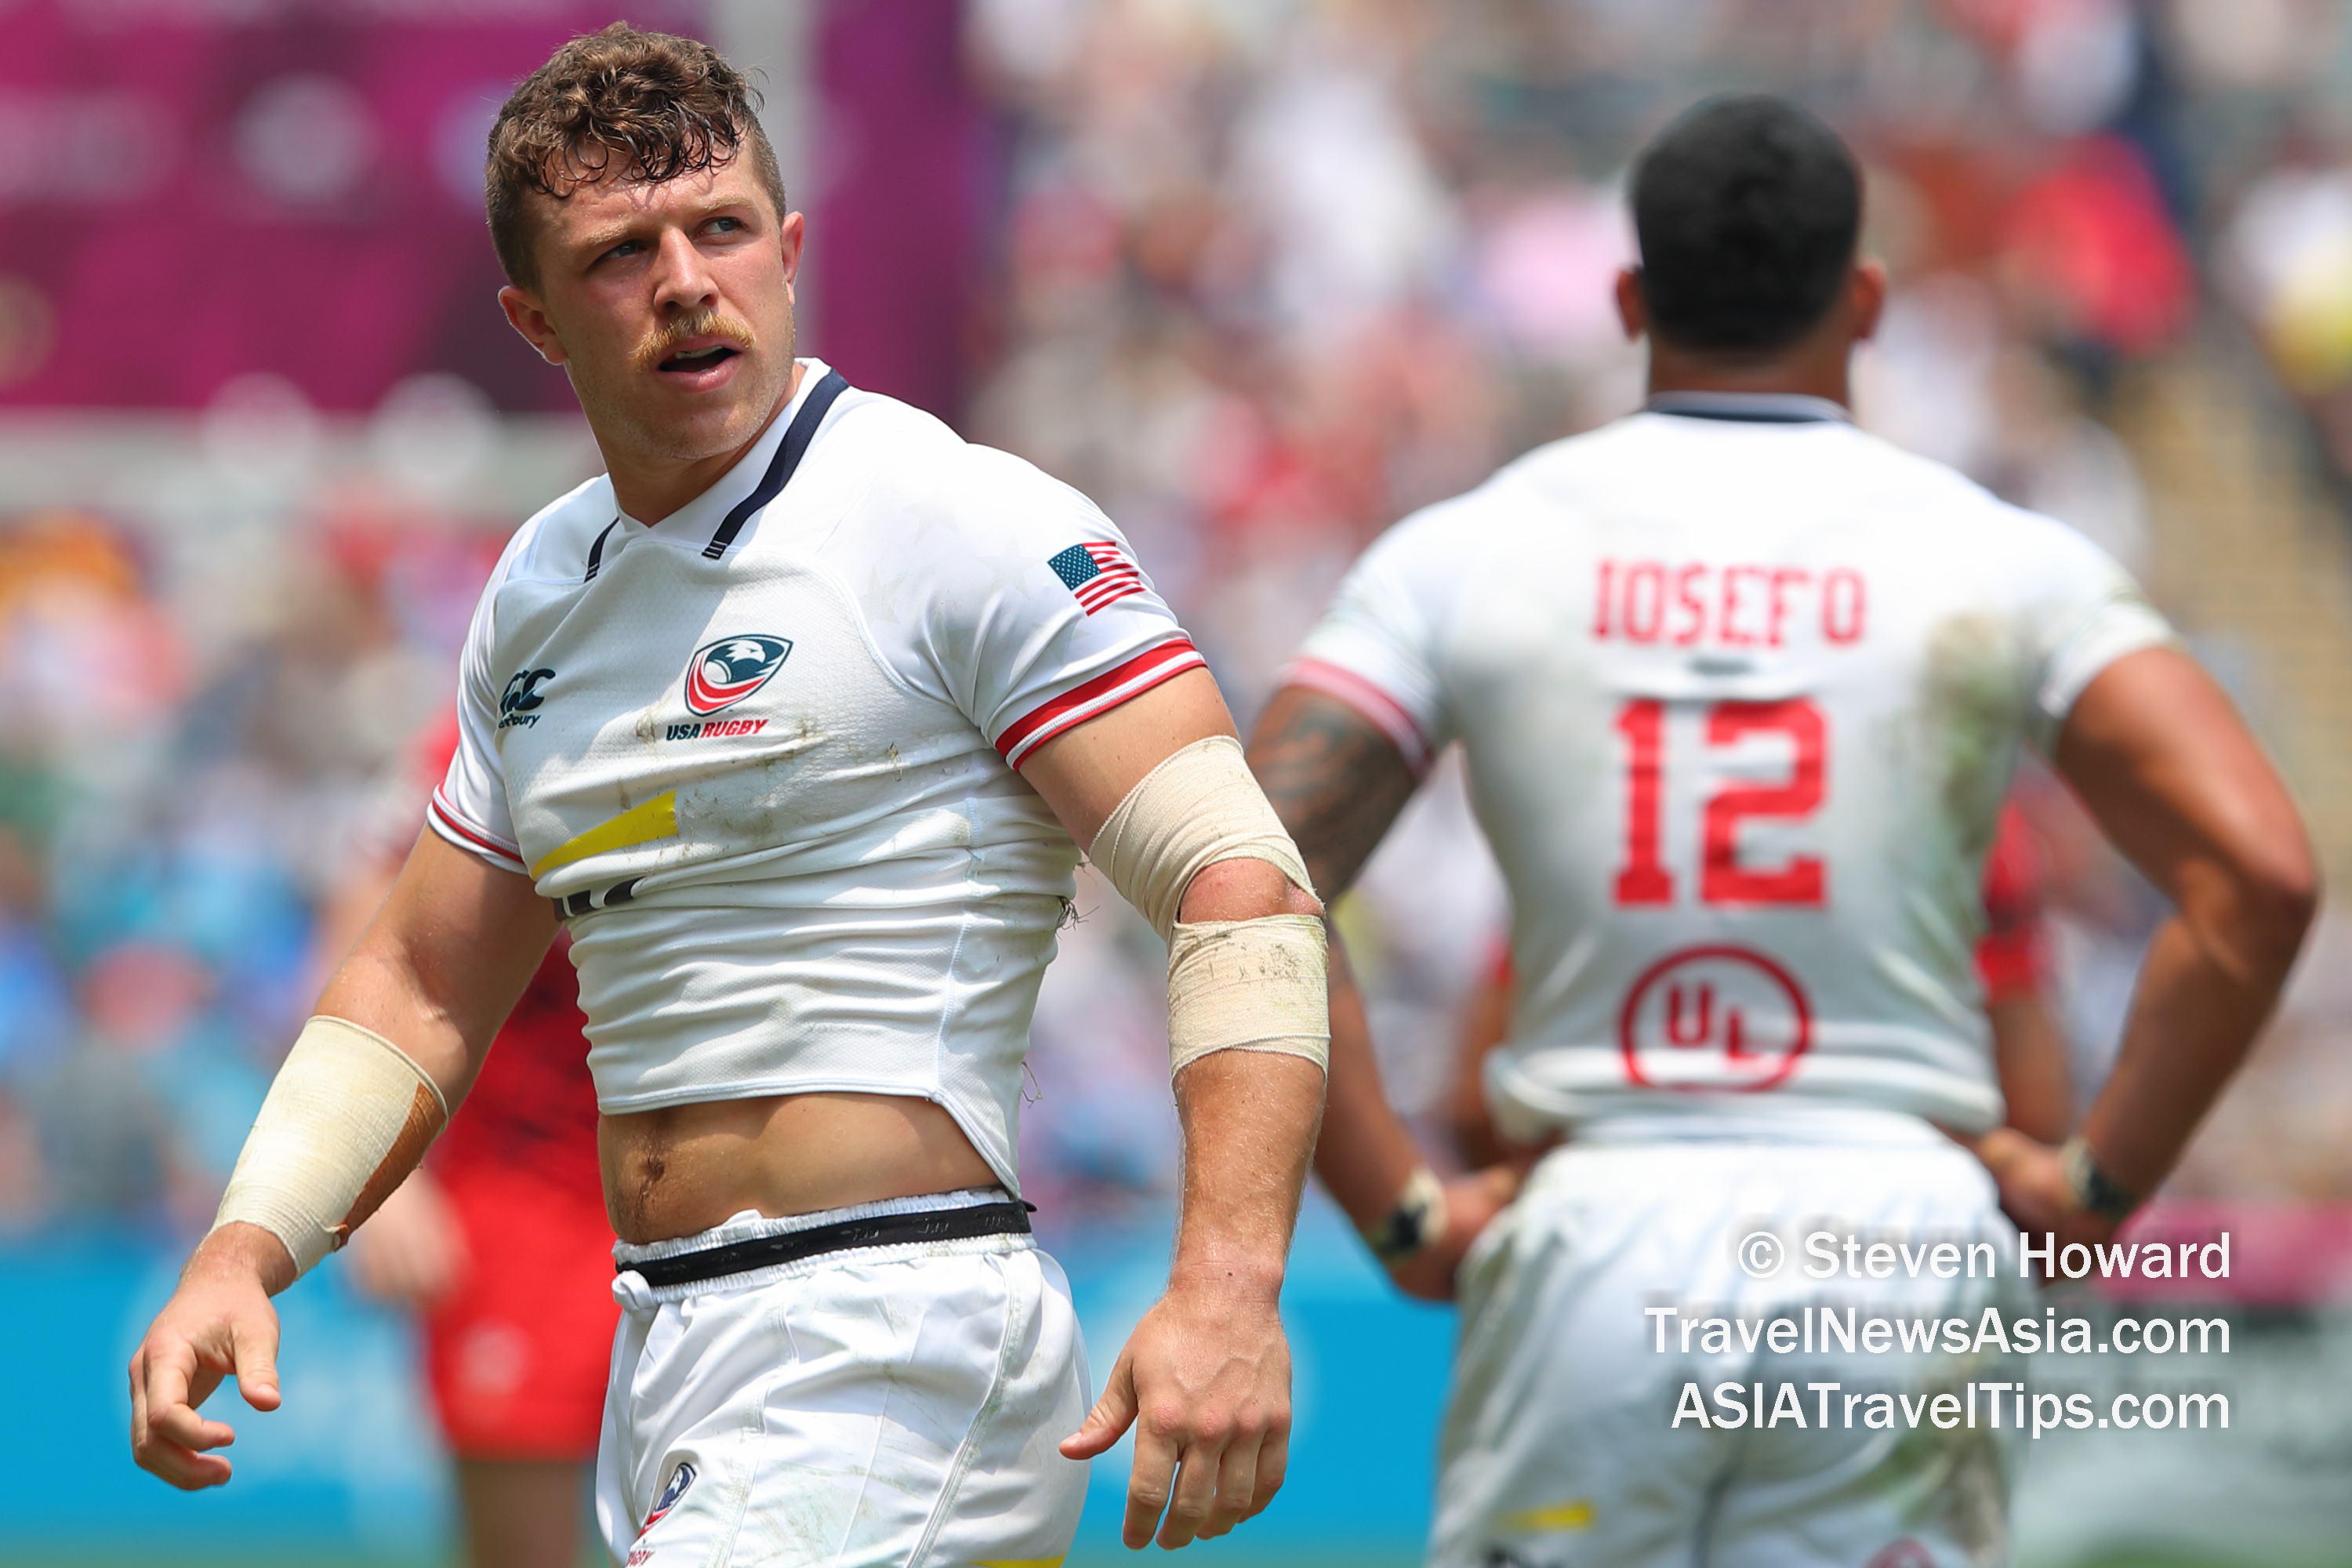 Stephen Tomasin in action for Team USA against Wales at the 2019 Cathay Pacific / HSBC Hong Kong Sevens. Picture by Steven Howard of TravelNewsAsia.com Click to enlarge.